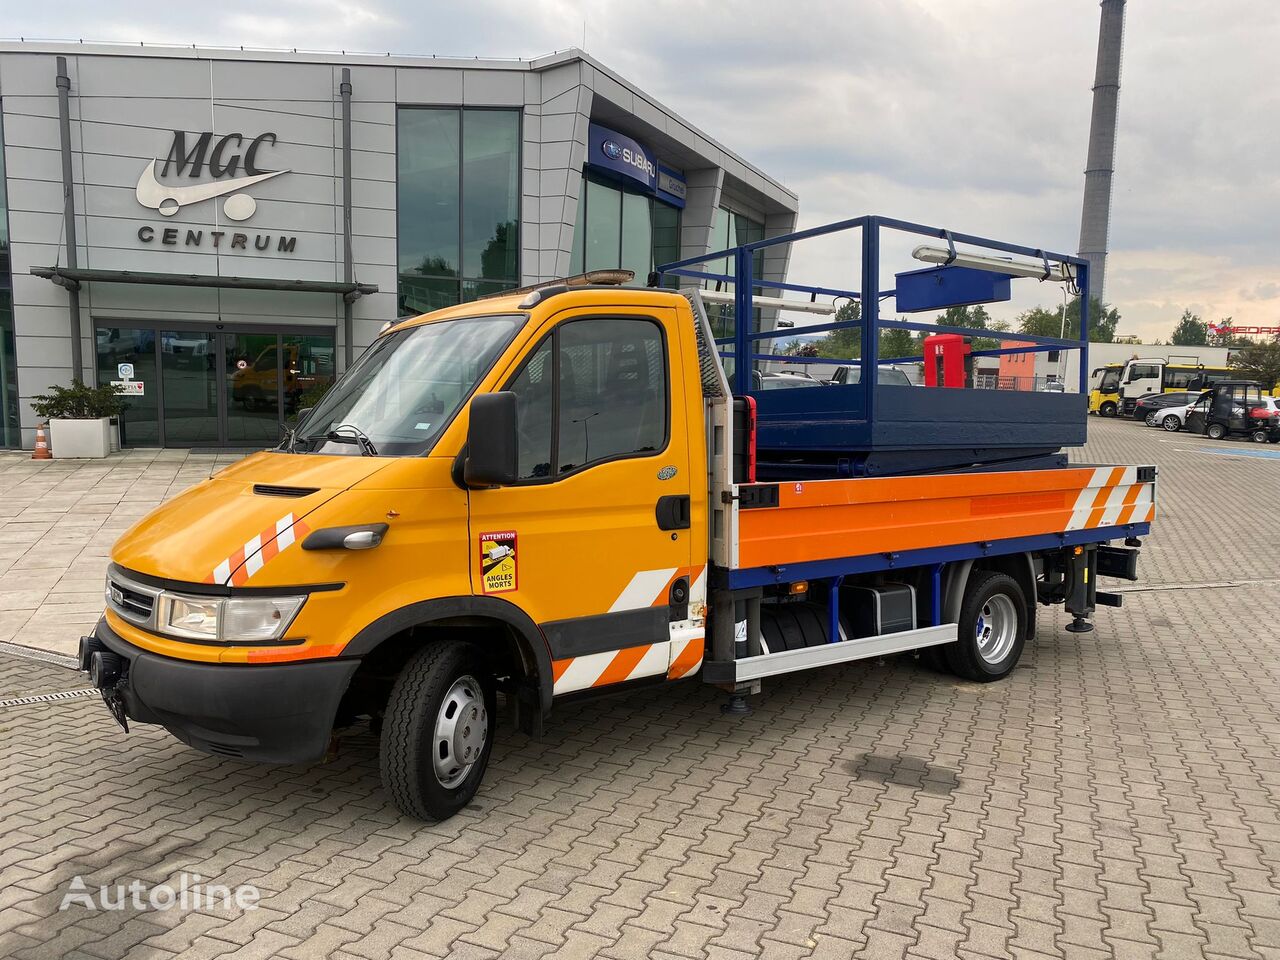 IVECO Daily 50C17 , 6 person platform, works really great. flatbed truck